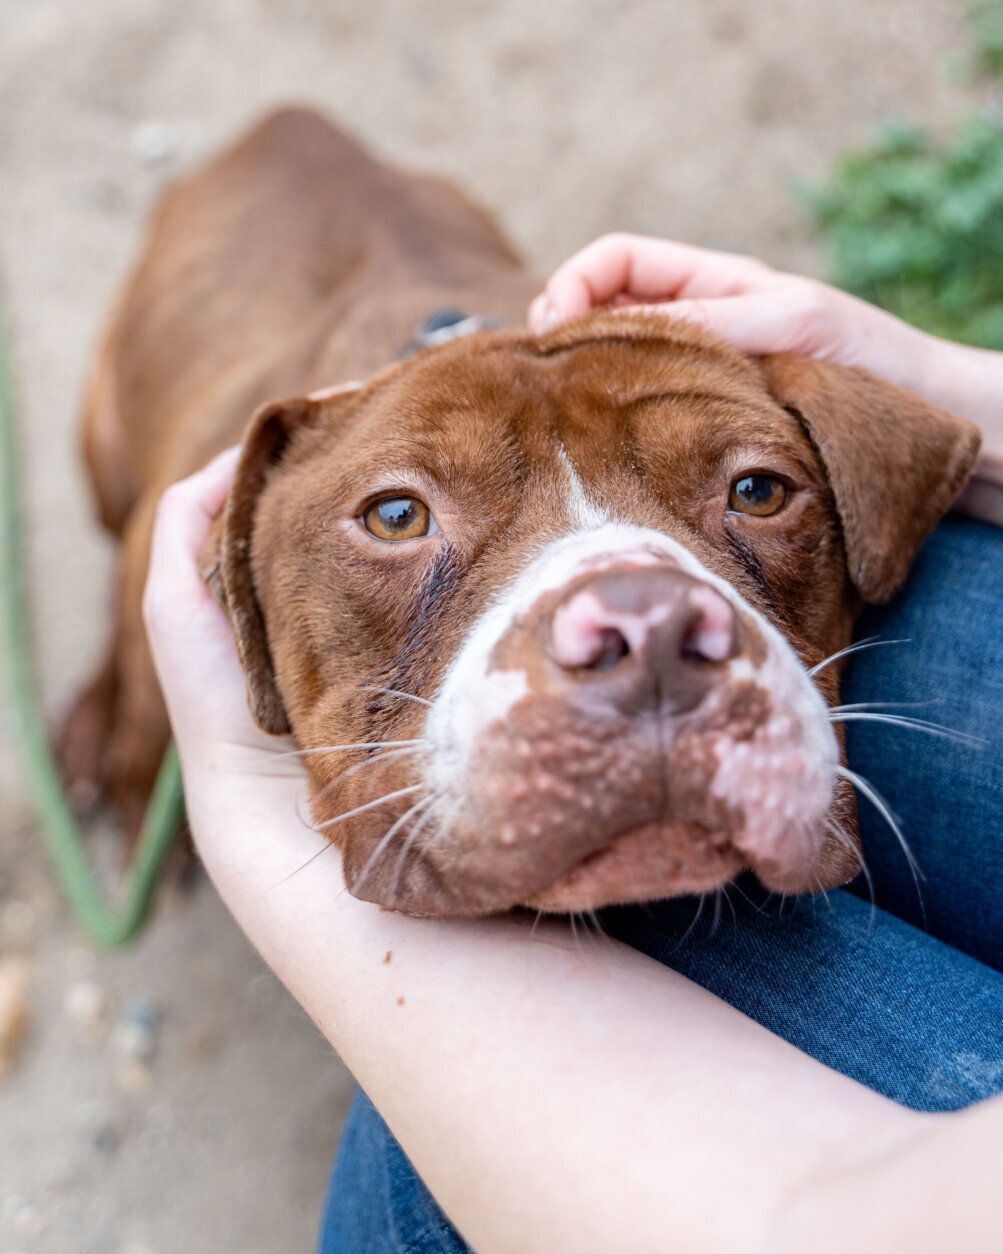 <p class="m_5865911322695972603xxmsonormal">Meet Knucklez! Who could resist his adorable freckled face? This sweet pup came to the Humane Rescue Alliance in rough shape. He was found underweight, cold and alone. Thanks to his new friends at HRA he&#8217;s feeling so much better, and now all he needs is a loving, new family to give him the pampering and attention he deserves.<u></u><u></u></p>
<p class="m_5865911322695972603xxmsonormal">Knucklez is a friendly, fun dog who loves to get outside and sniff around. He&#8217;s a smart 3-year-old pup and is happy to do tricks for treats! To learn more and to meet Knucklez, visit <a href="http://humanerescuealliance.org/adopt" target="_blank" rel="noopener" data-saferedirecturl="https://www.google.com/url?q=http://humanerescuealliance.org/adopt&amp;source=gmail&amp;ust=1652194942906000&amp;usg=AOvVaw3-kAZBP6Nb0-vB9DUUQVjg">humanerescuealliance.org/adopt</a><wbr />.</p>
